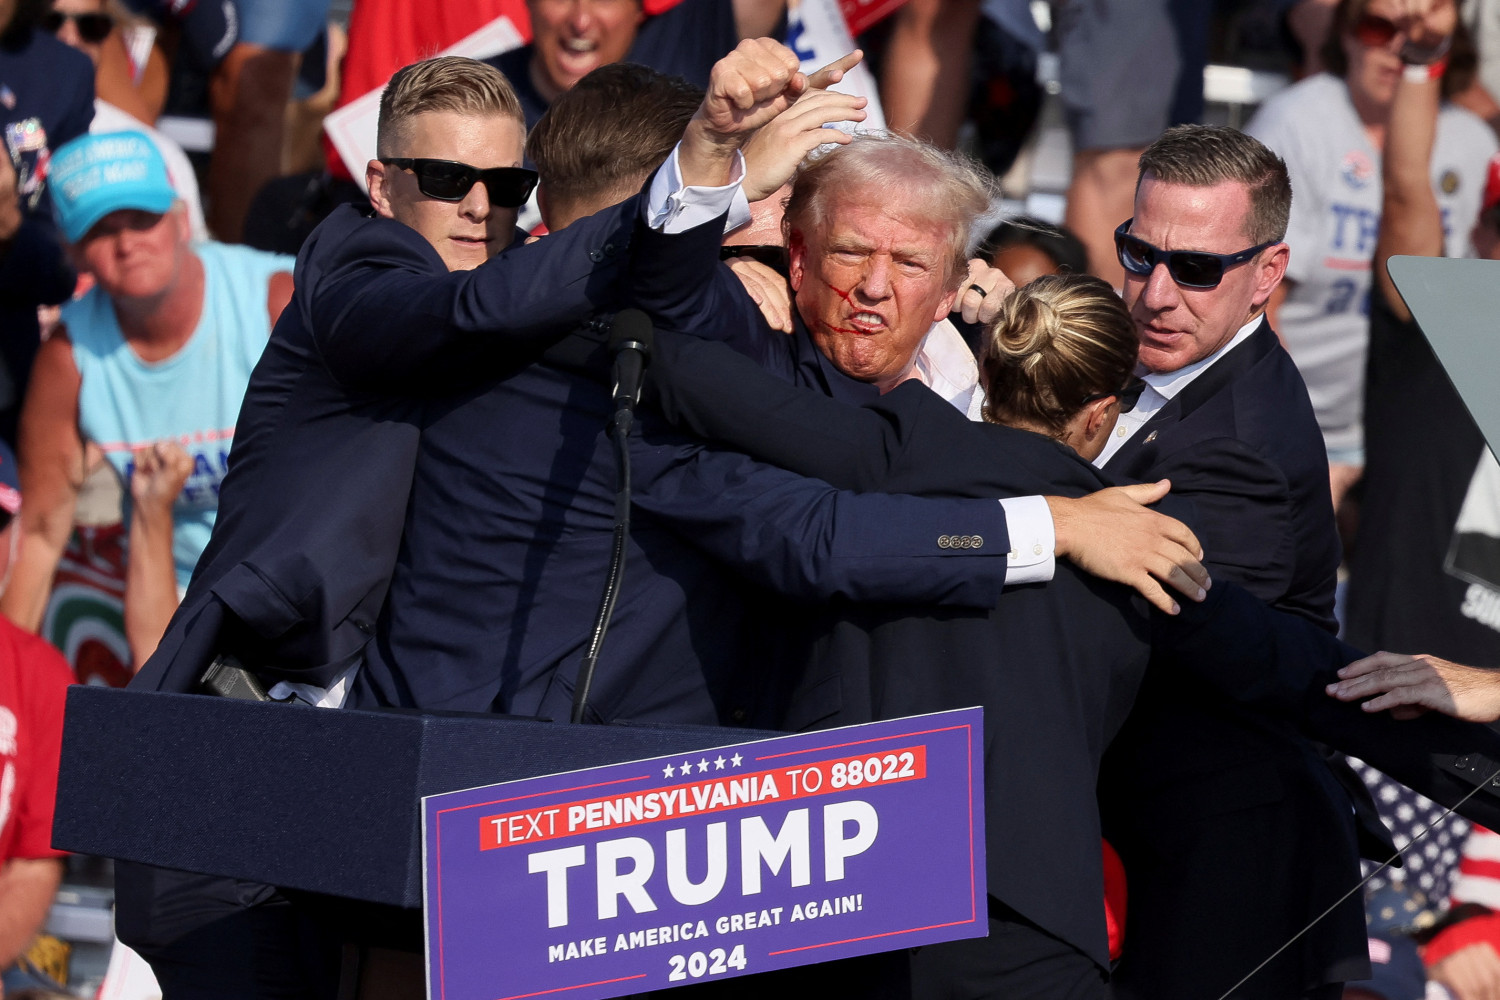 https://img5.s3wfg.com/web/img/images_uploaded/0/5/republican-presidential-candidate-donald-trump-holds-a-campaign-rally-in-butler_20240714180151_rsz.jpg